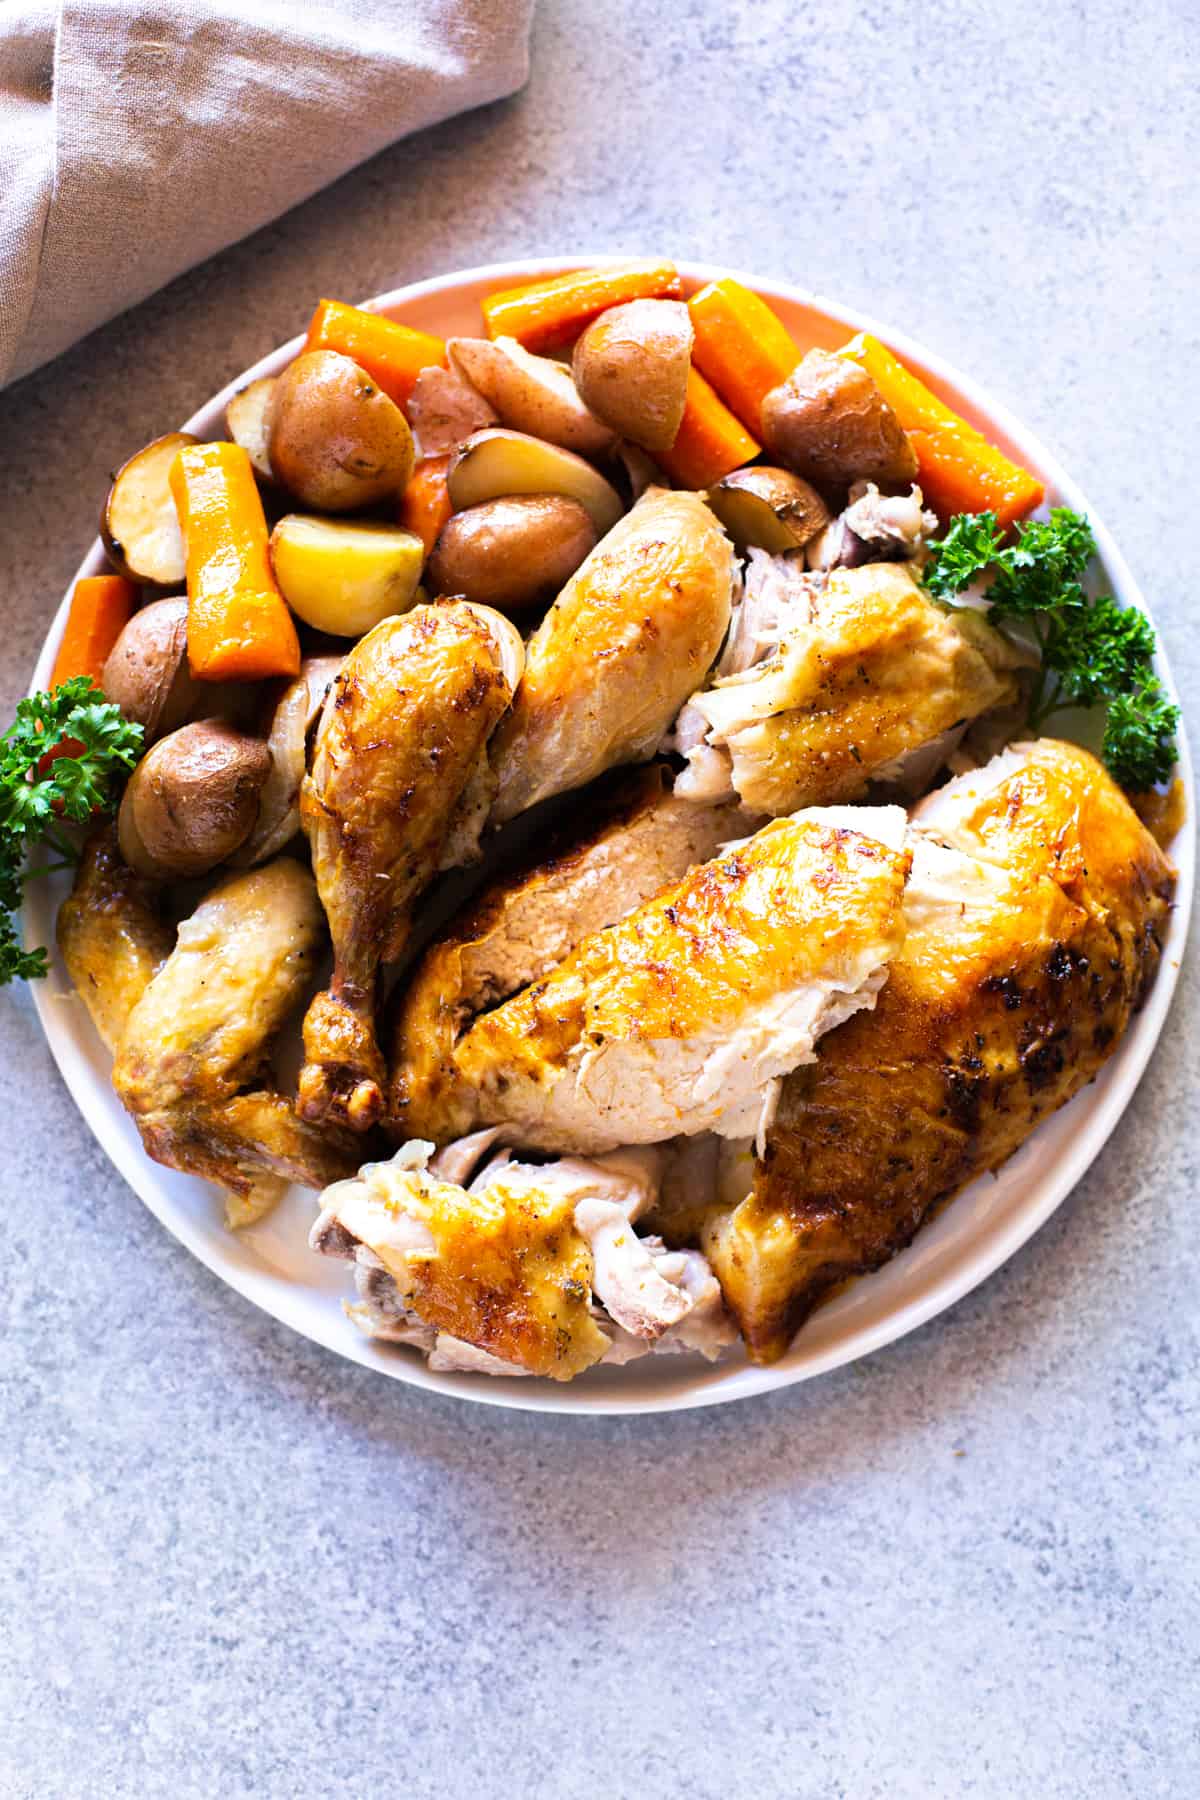 A plate filled with cut up roast chicken, and cooked vegetables; ready to eat!